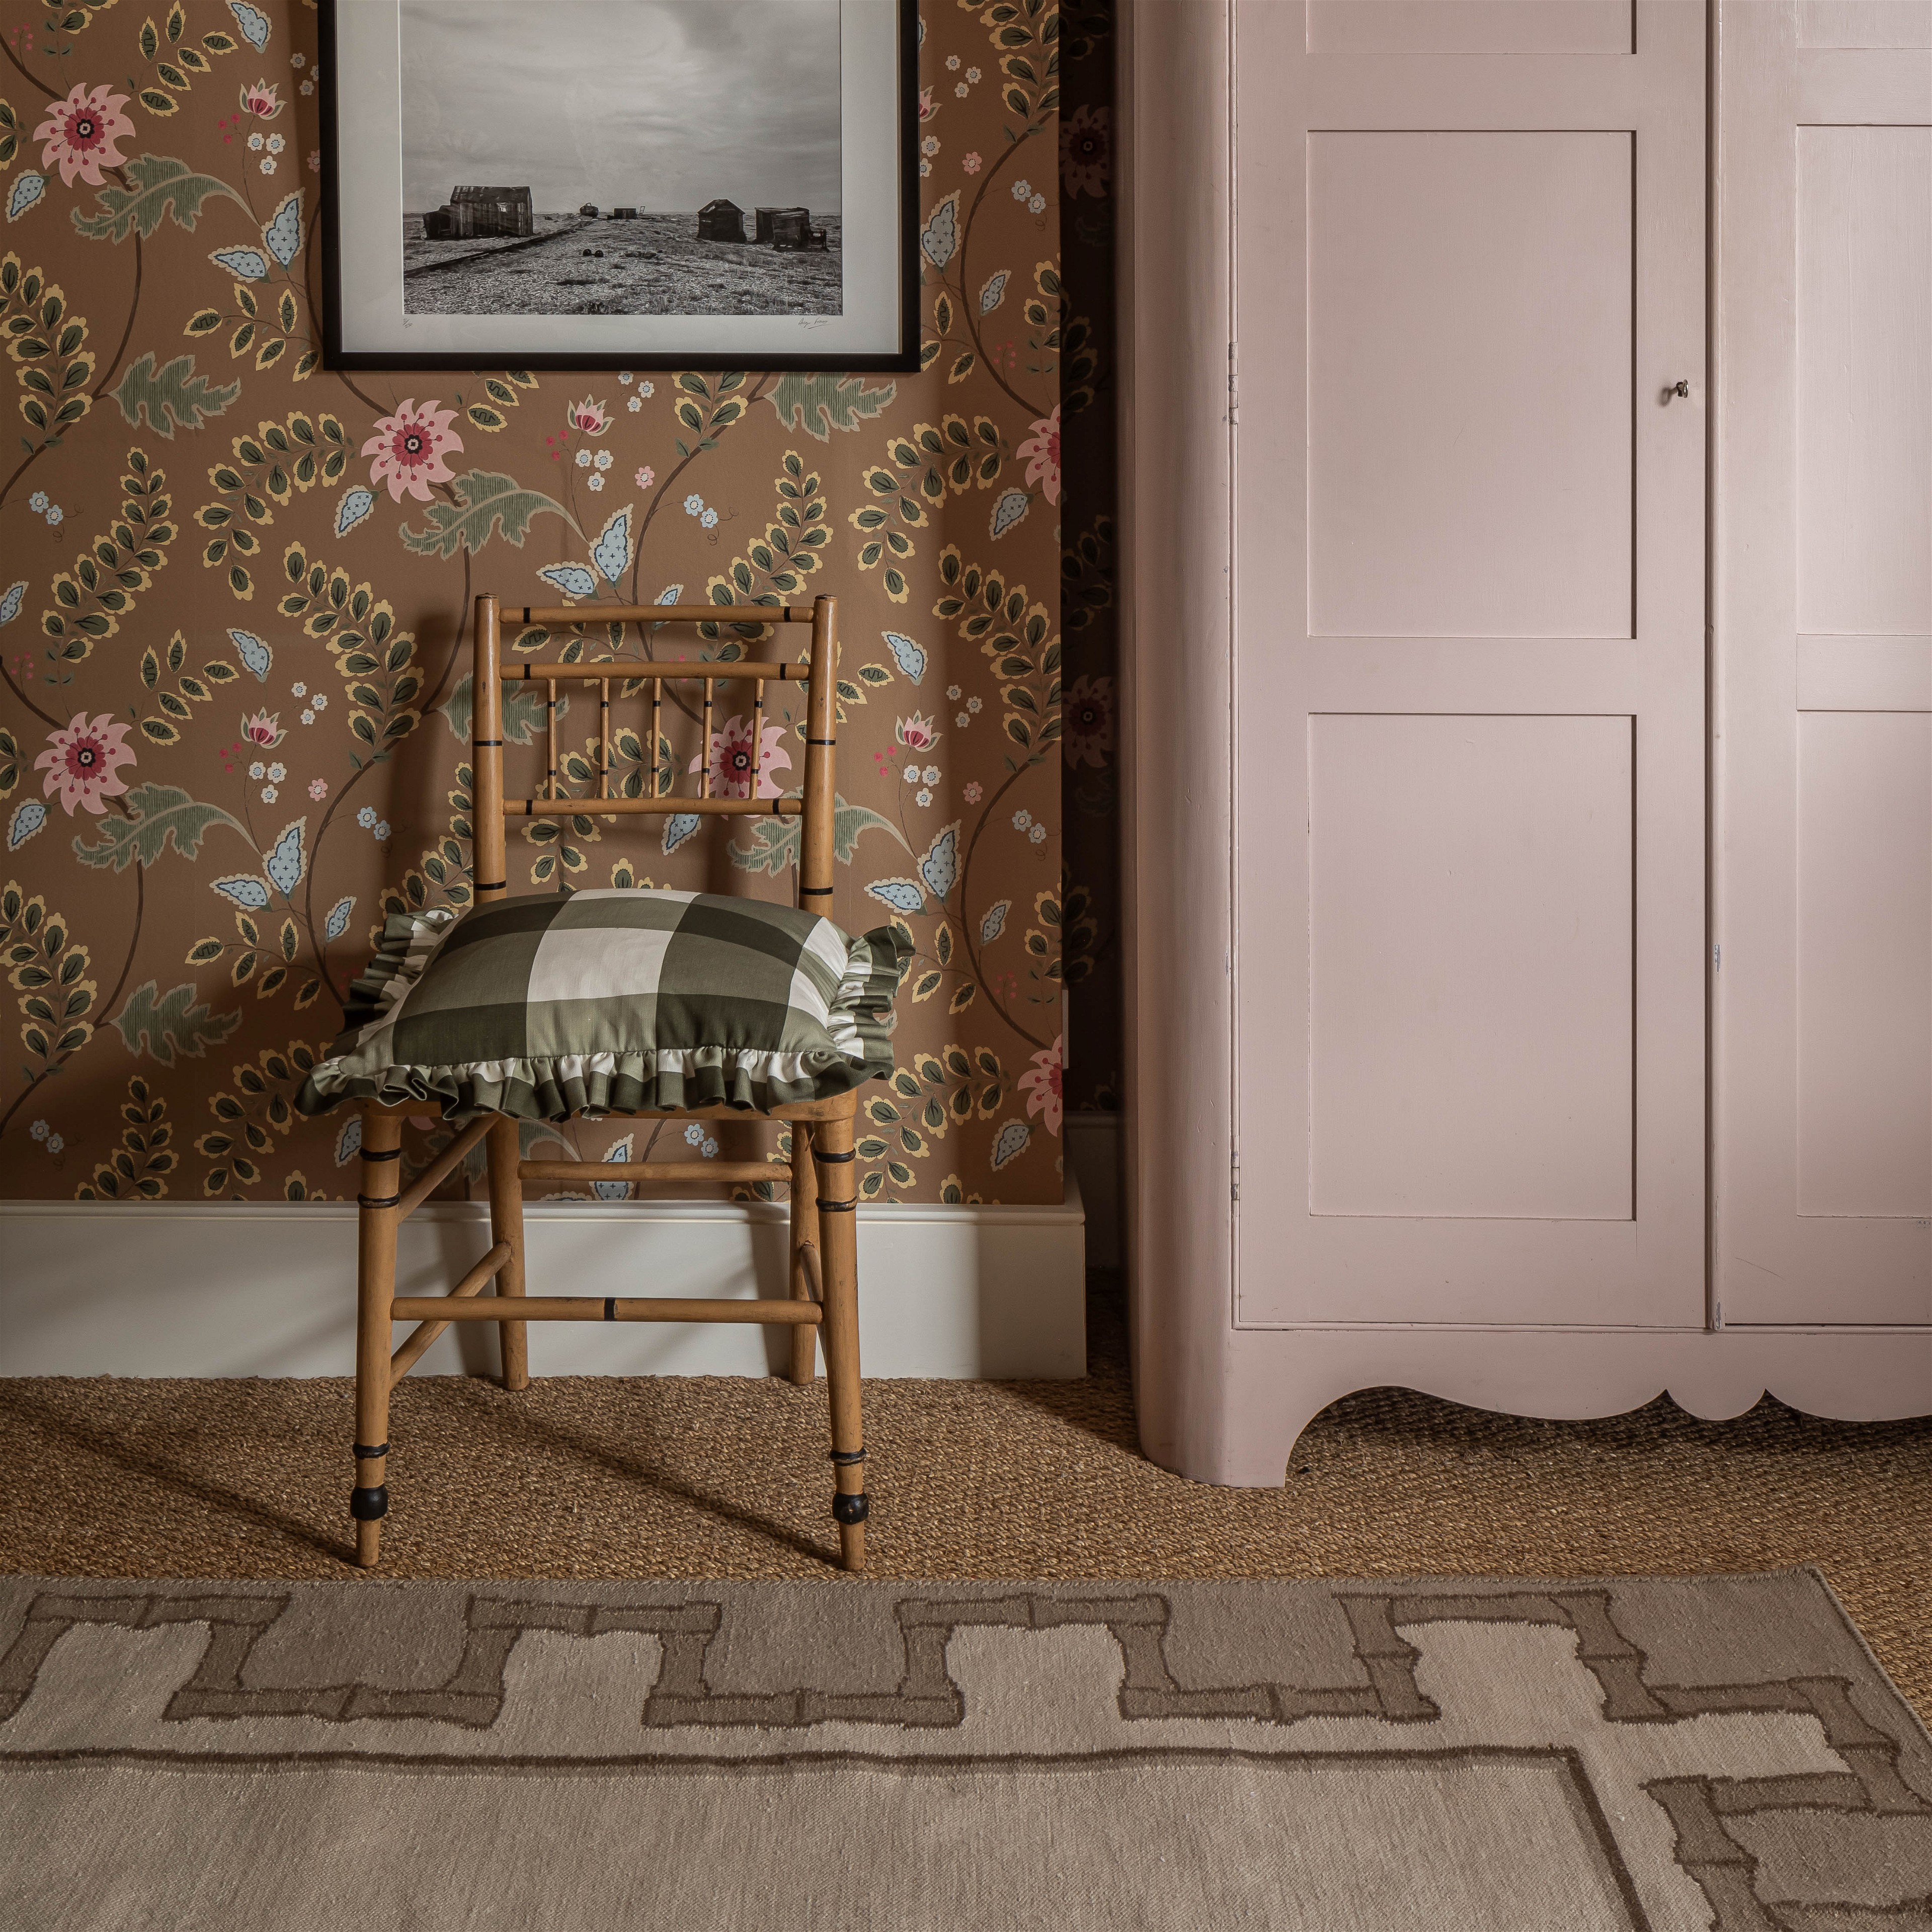 a pink armoire in a room with a floral wallpaper